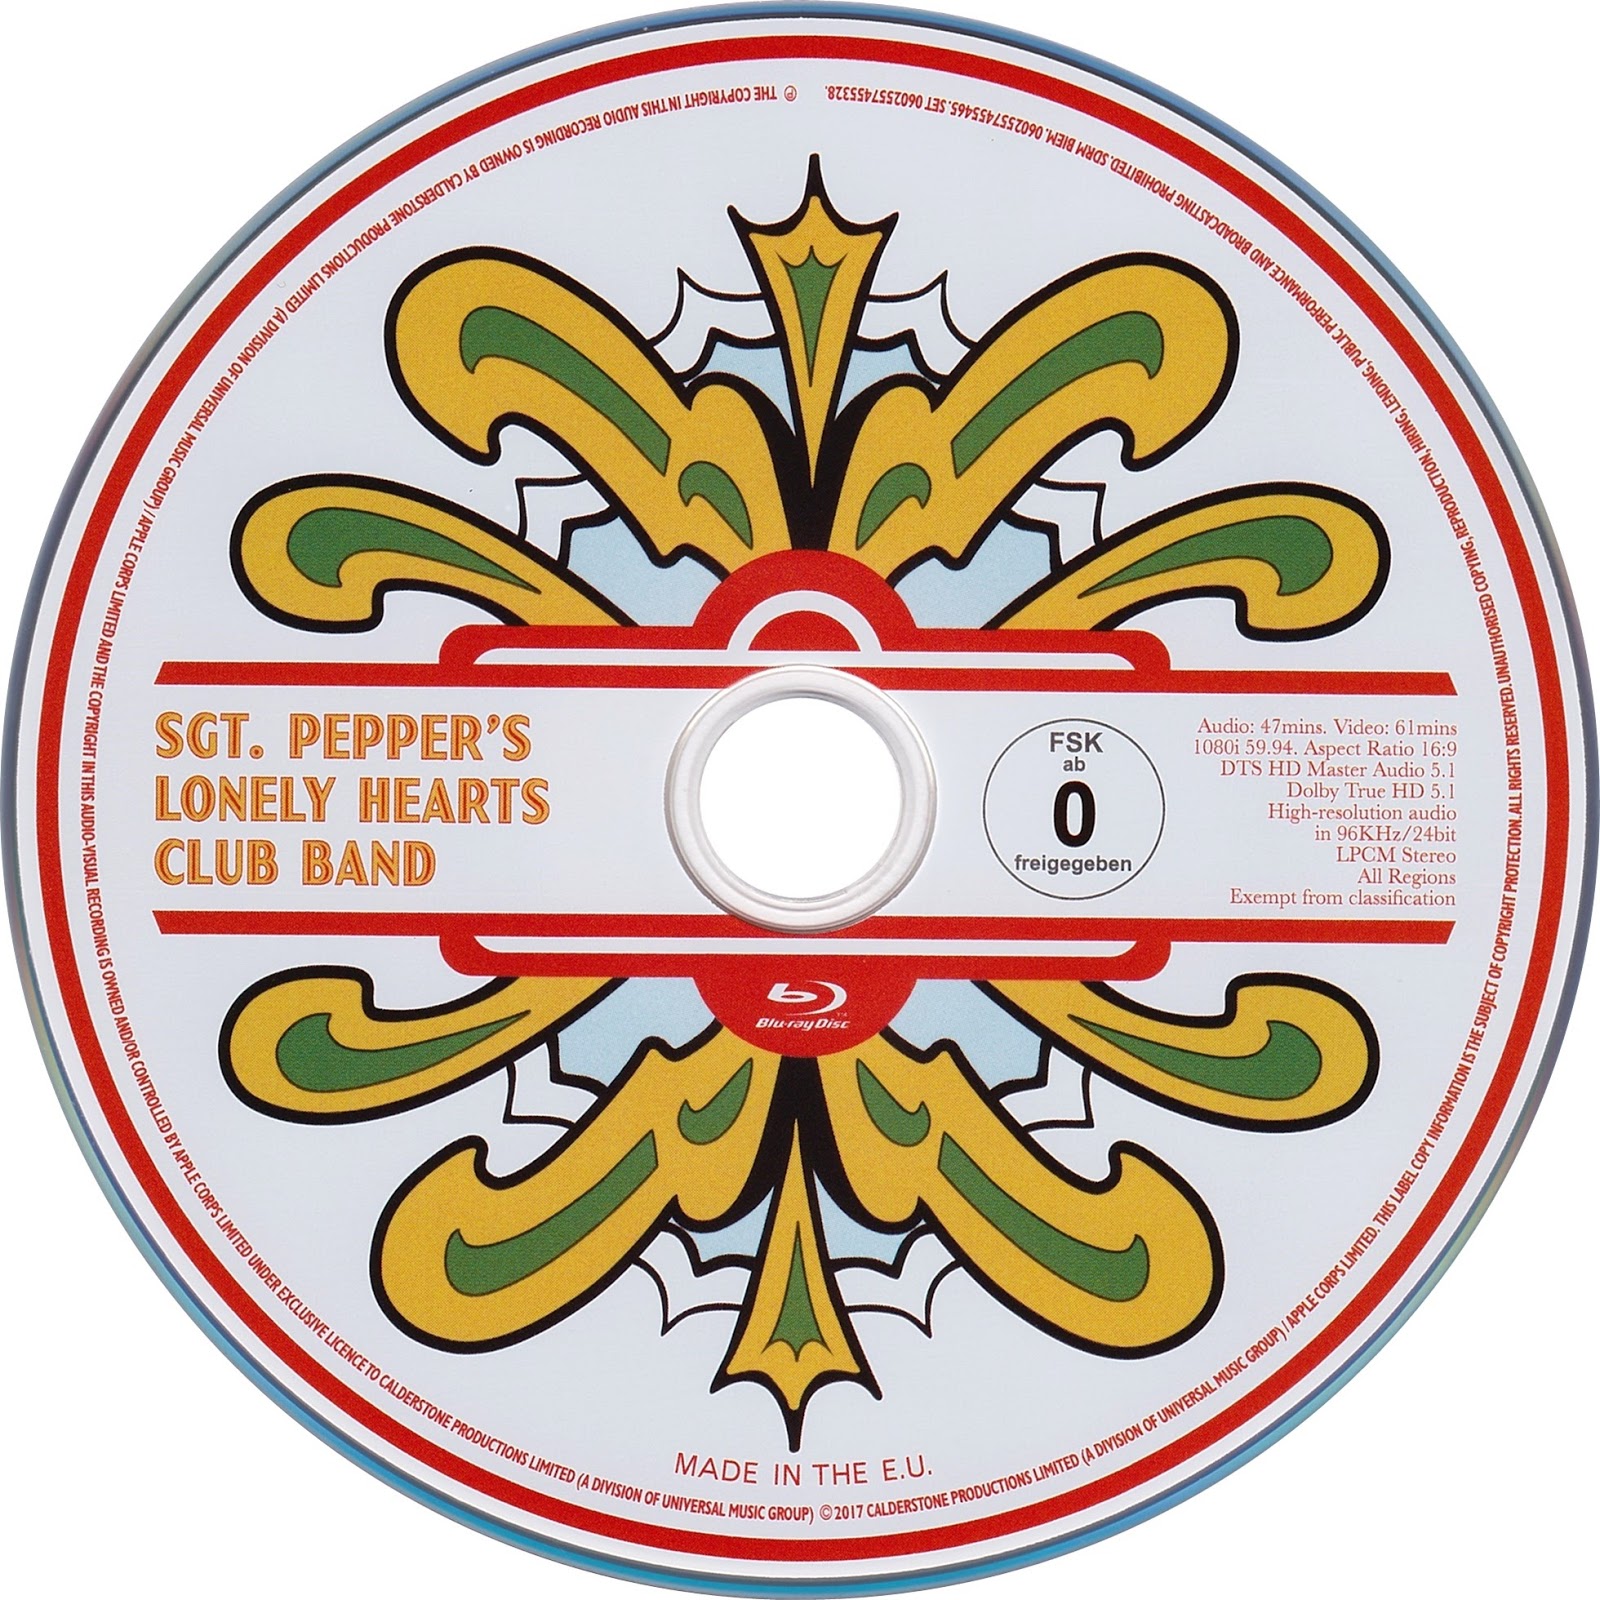 Beatles sgt peppers lonely hearts club. Sgt. Pepper's Lonely Hearts Club Band CD. Beatles Sergeant Pepper's Lonely Hearts Club Band. Битлз Sgt Pepper s Lonely Hearts Club Band. Beatles Sgt Pepper's Lonely Hearts Club Band CD.